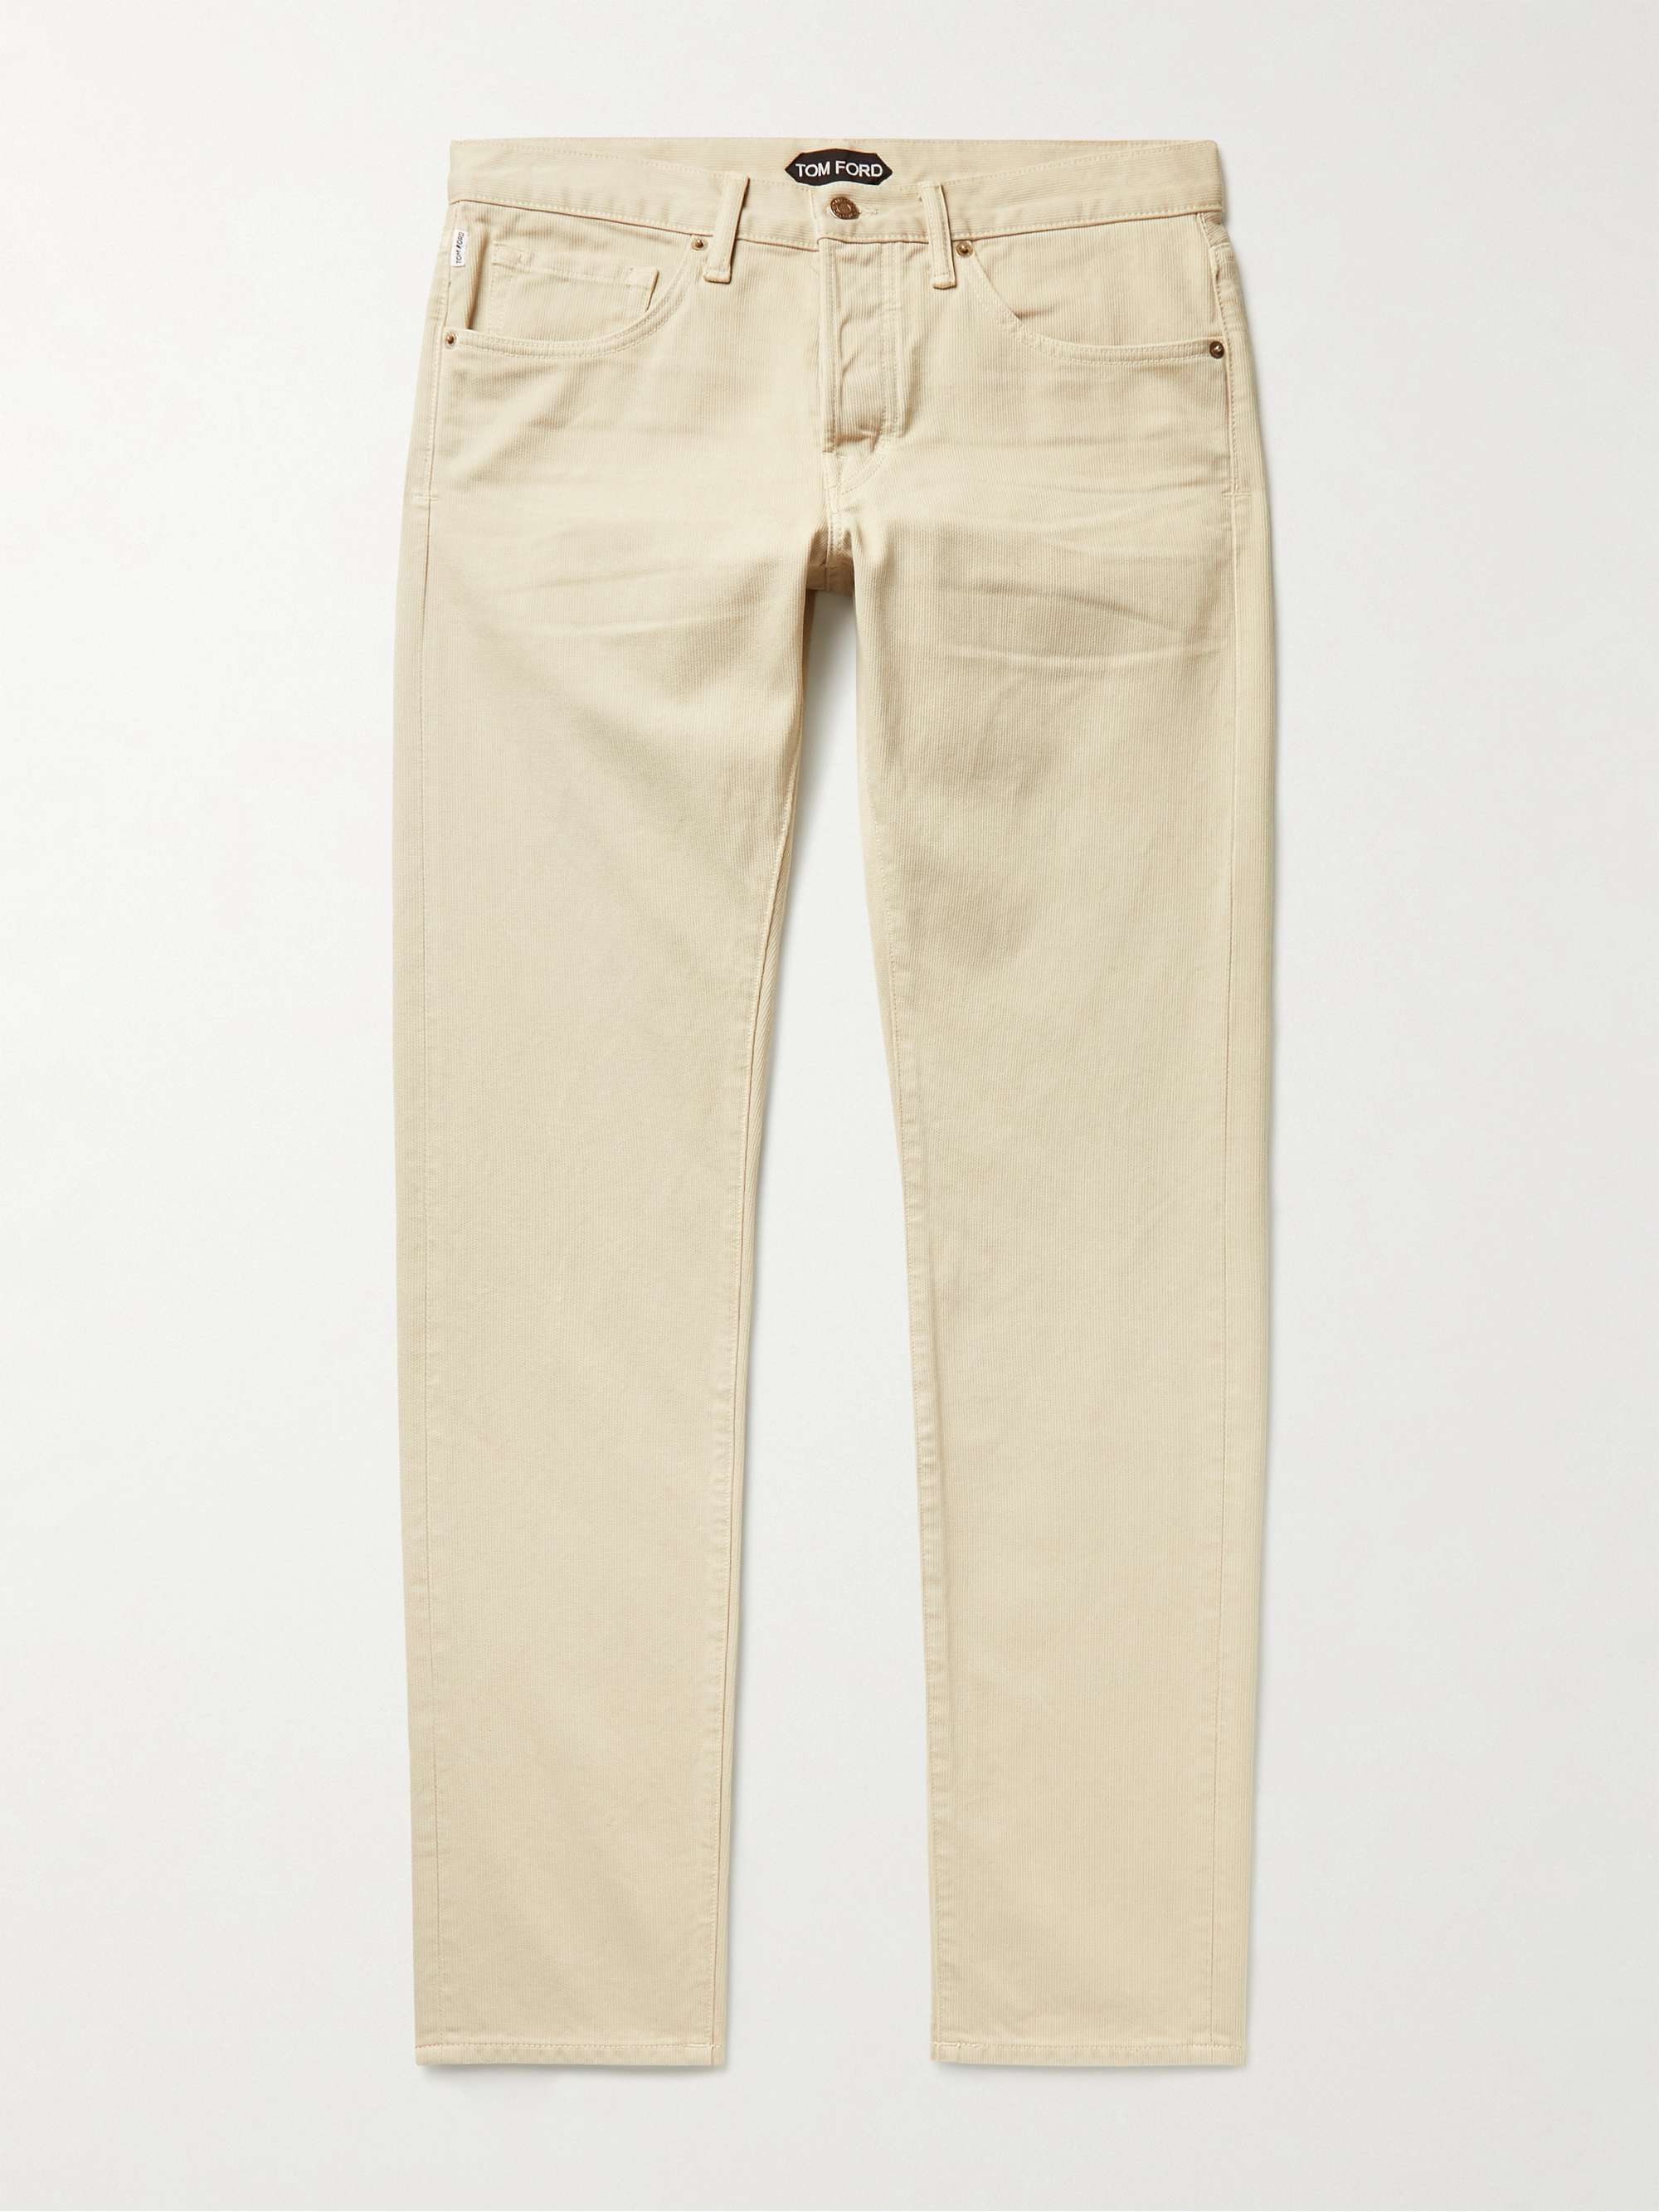 TOM FORD Slim-Fit Garment-Dyed Cotton-Corduroy Trousers